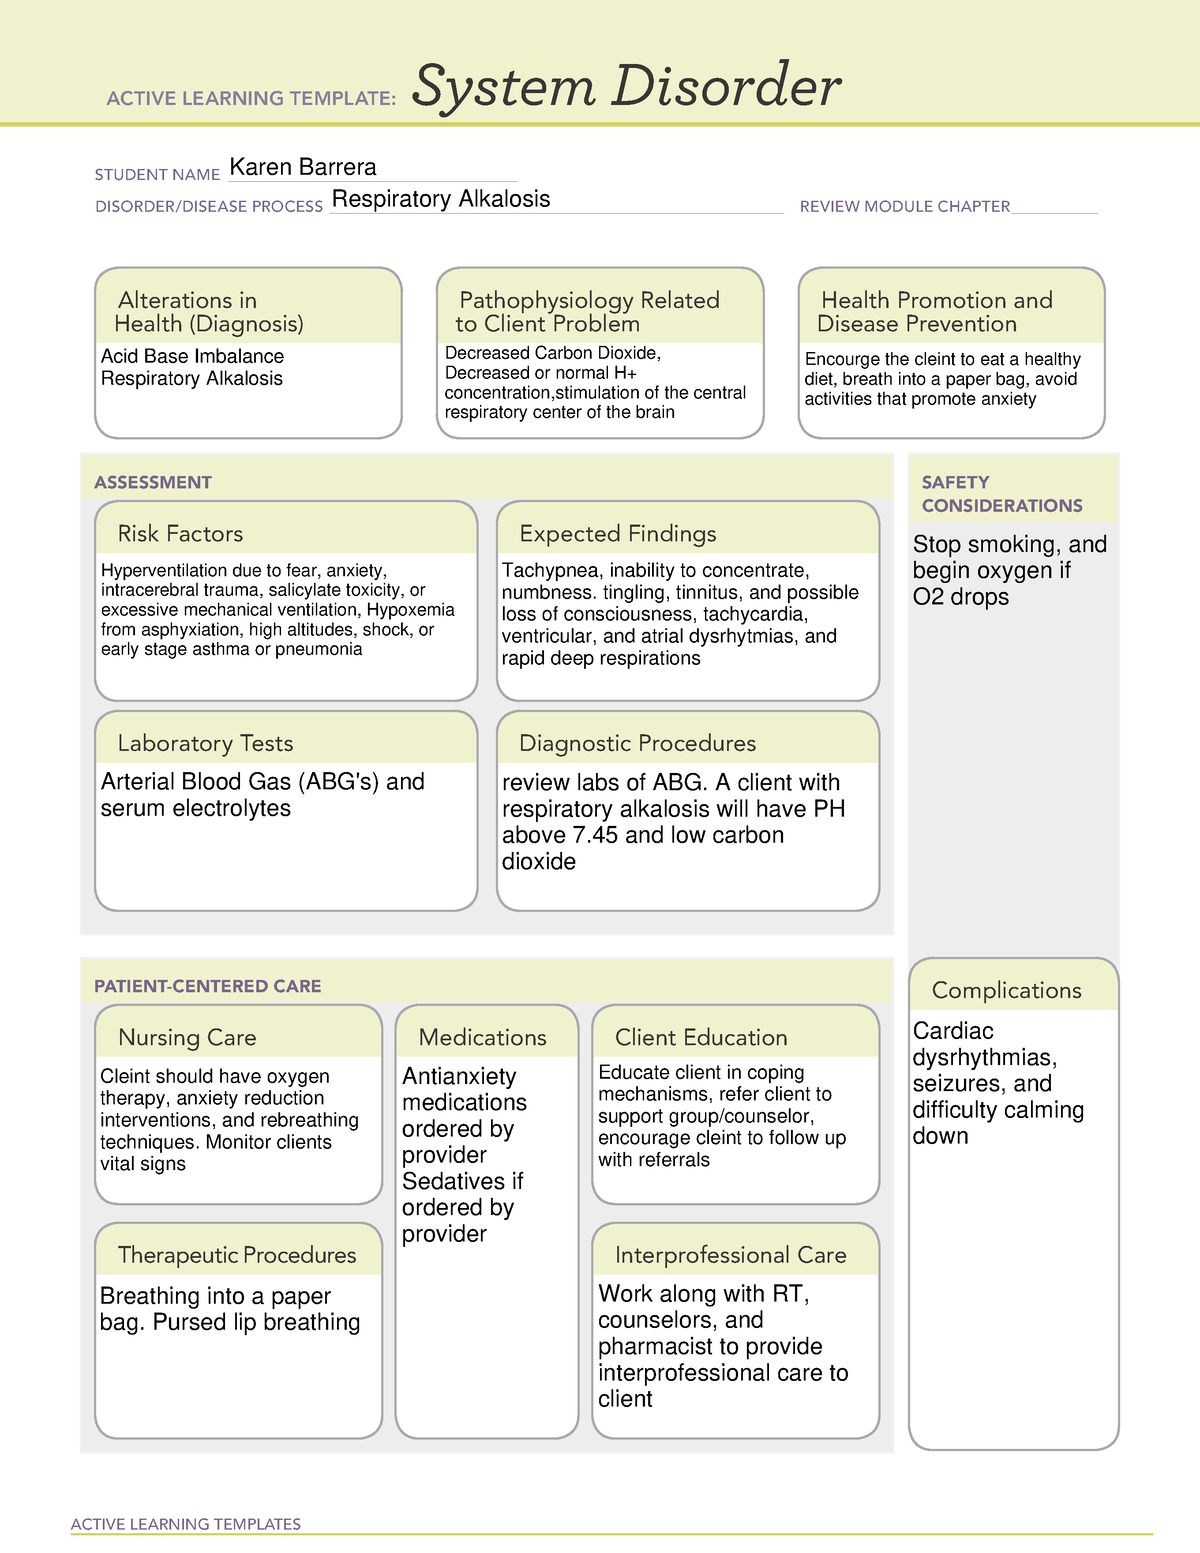 Respiratory Alkalosis System disorder template - ACTIVE LEARNING ...